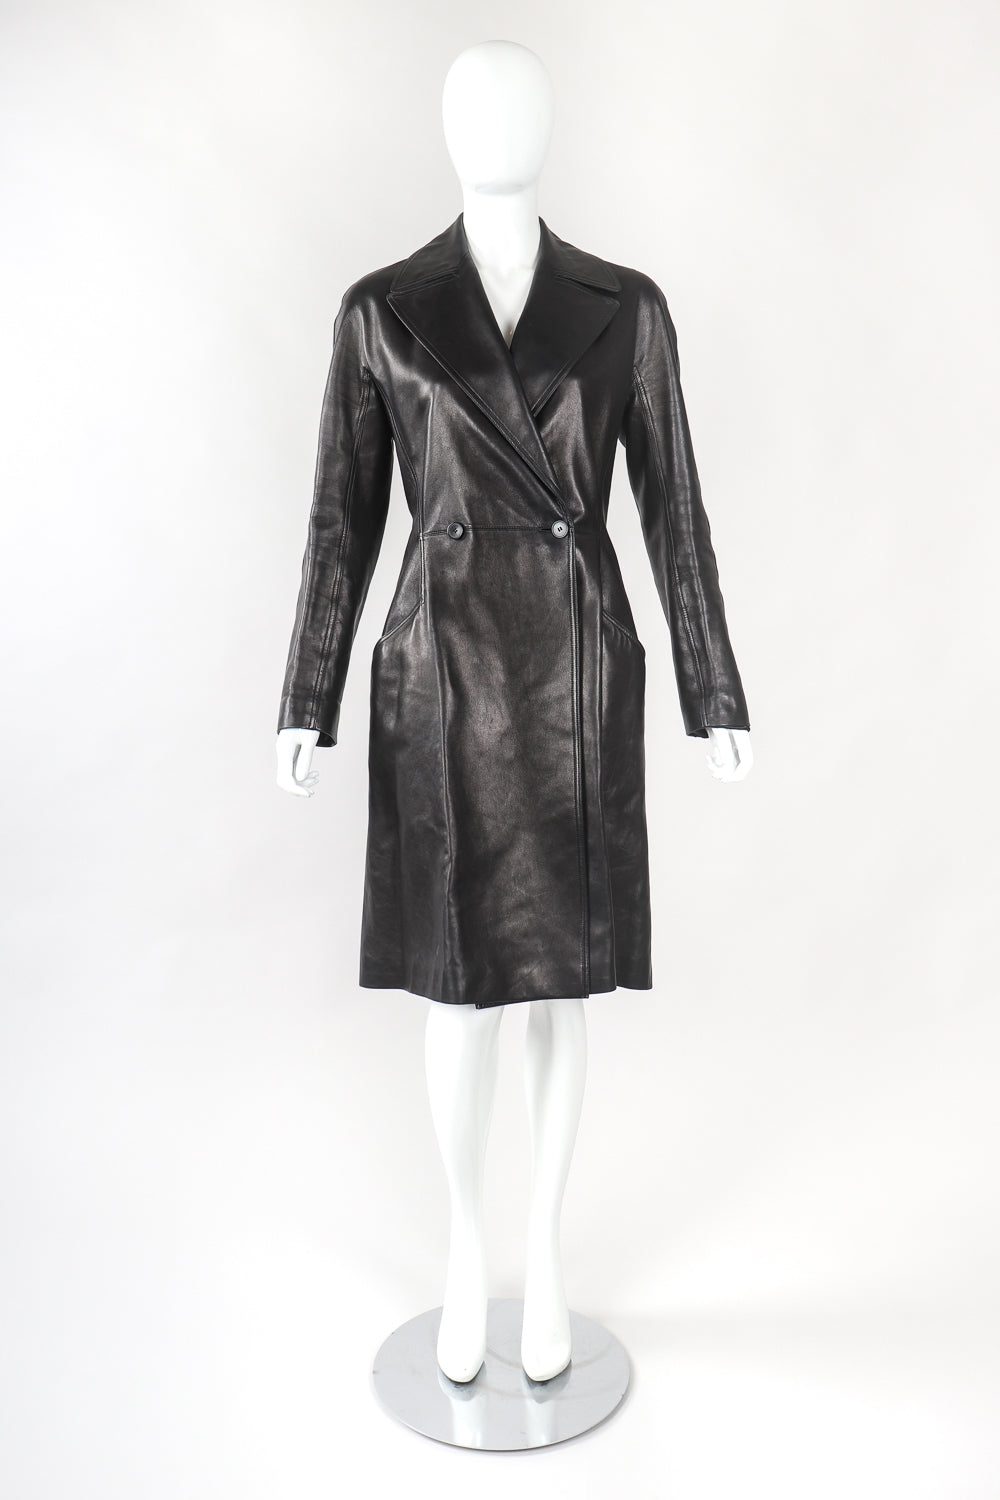 Recess Designer Consignment Vintage Alaia Wide Lapel Leather Trench Coat Los Angeles Resale